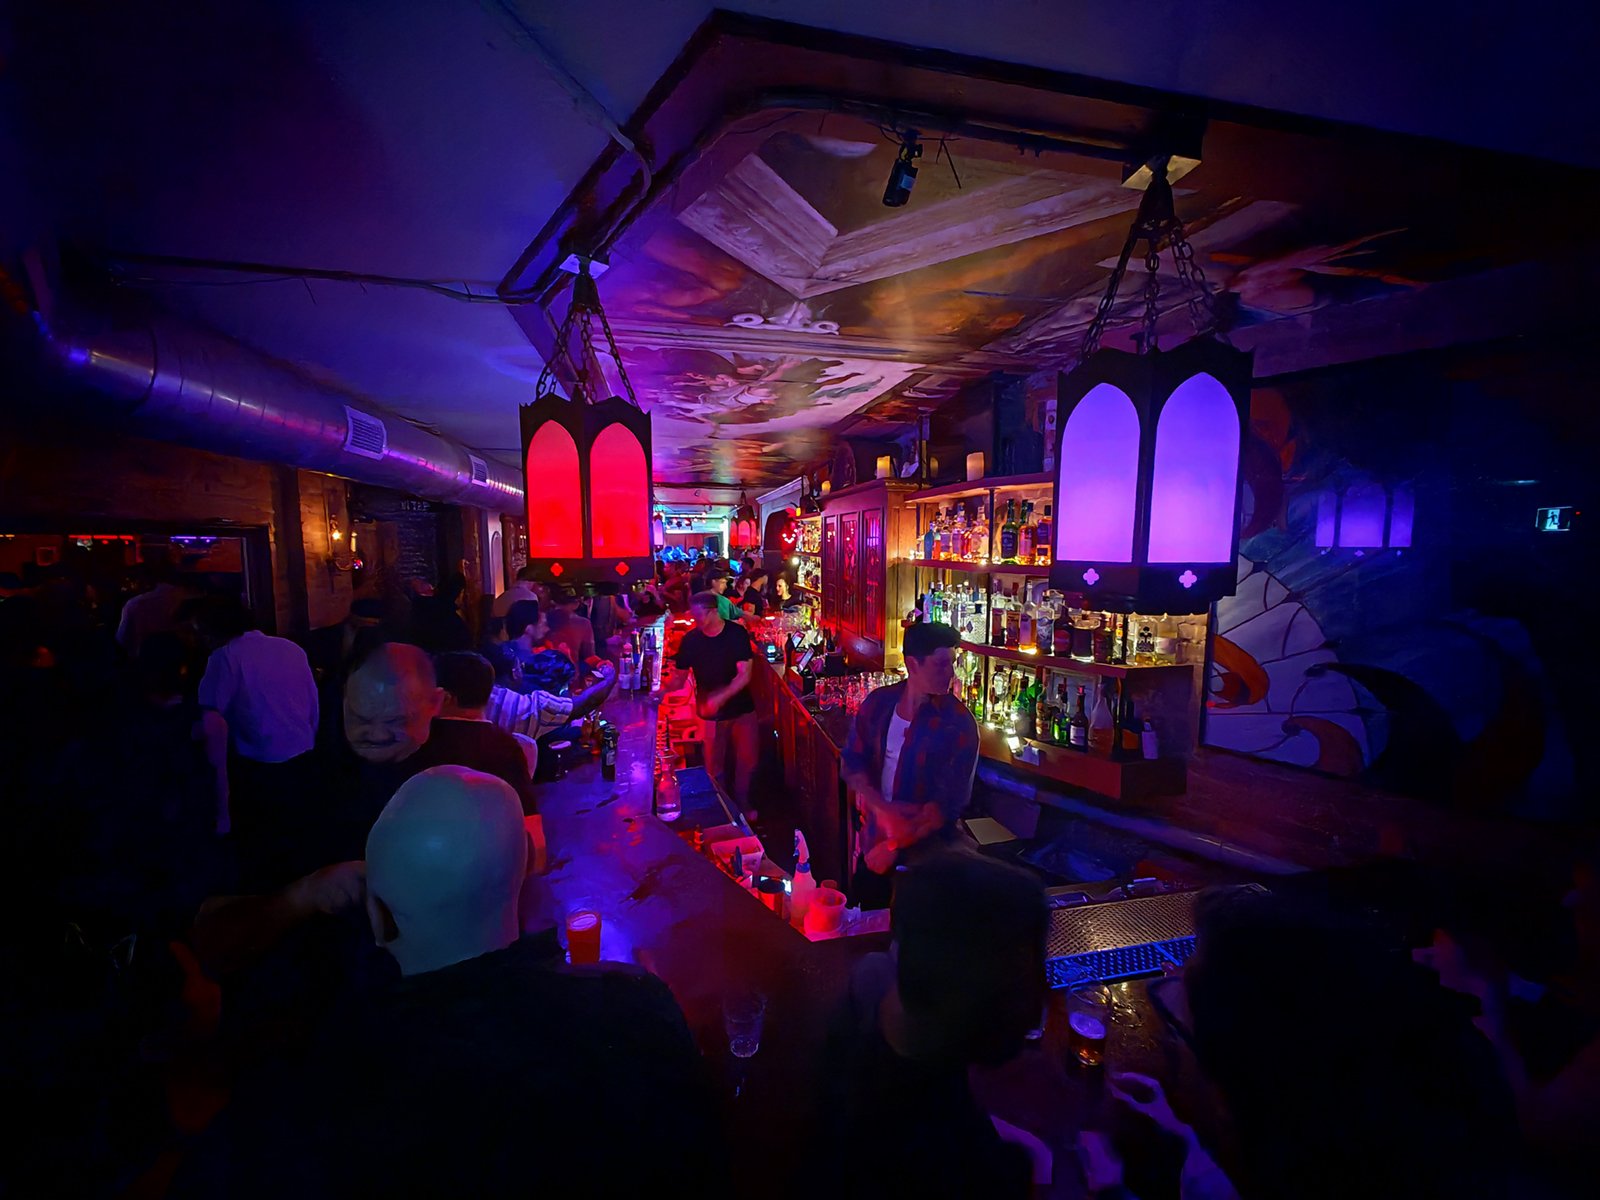 A vibrant, crowded bar at night with colorful lighting, patrons socializing, and a bartender serving drinks under mural-decorated ceilings.